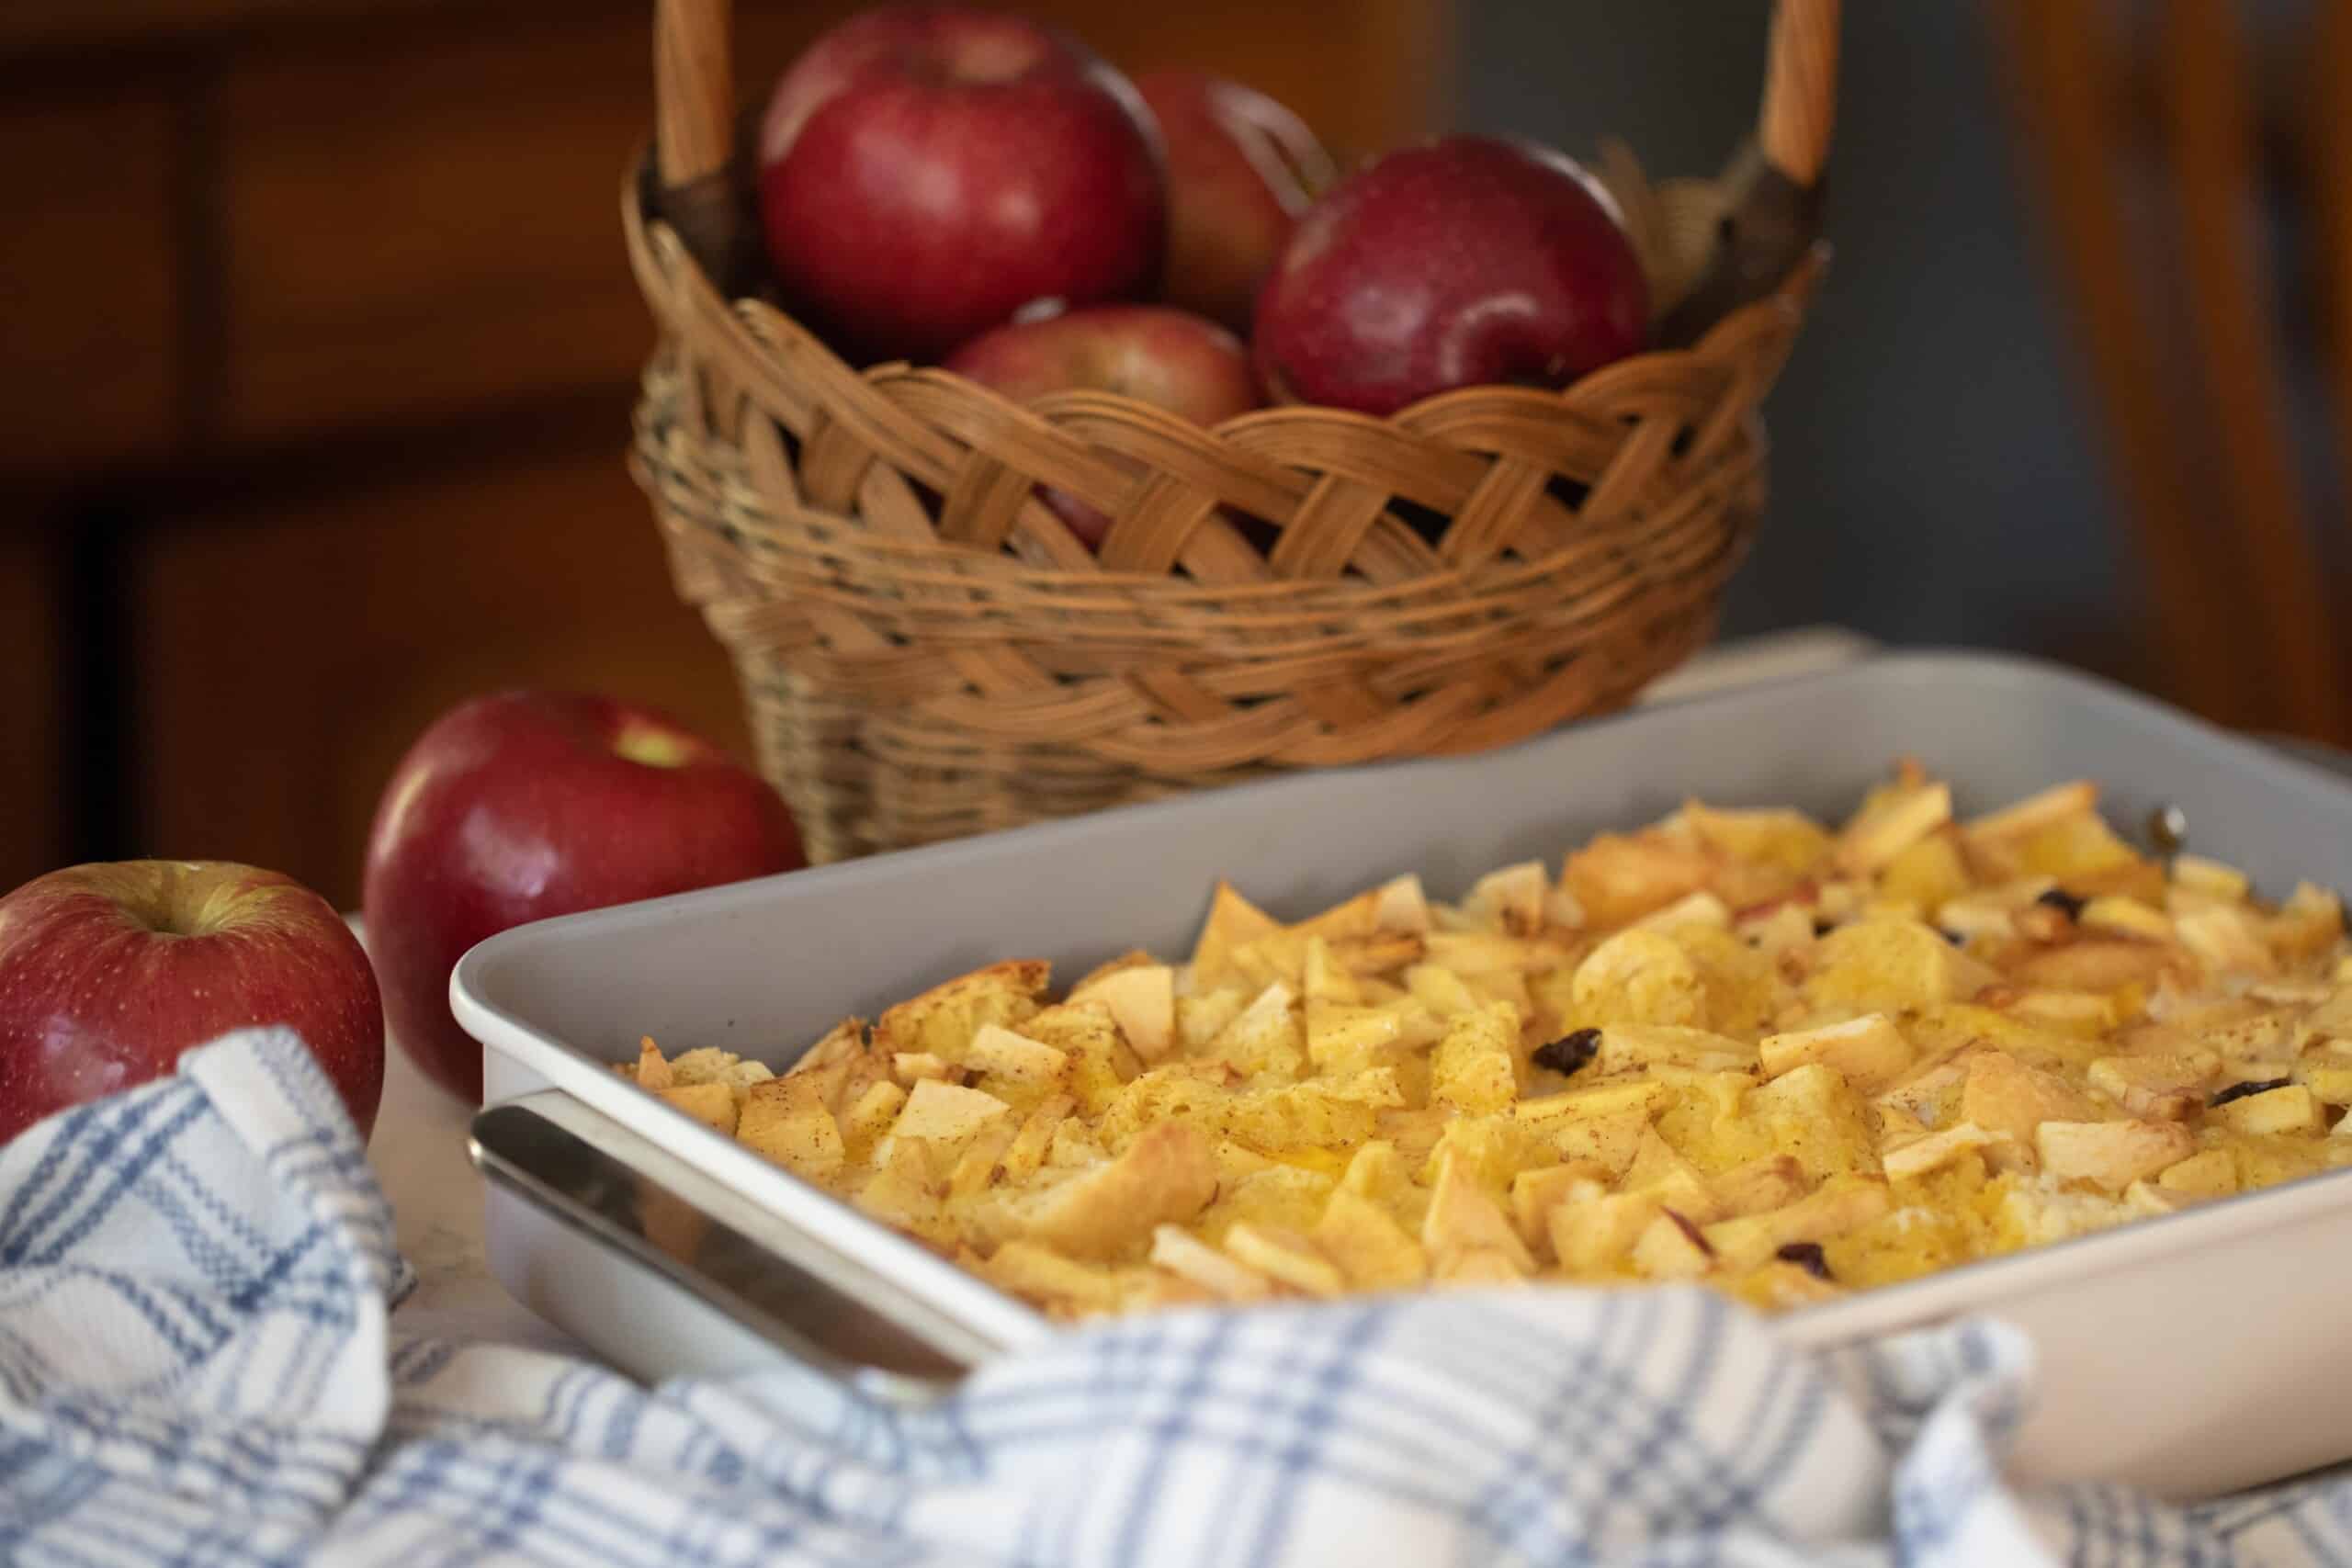 sourdough French toast casserole with raisins and apples in a baking dish with a basket of apples in the background